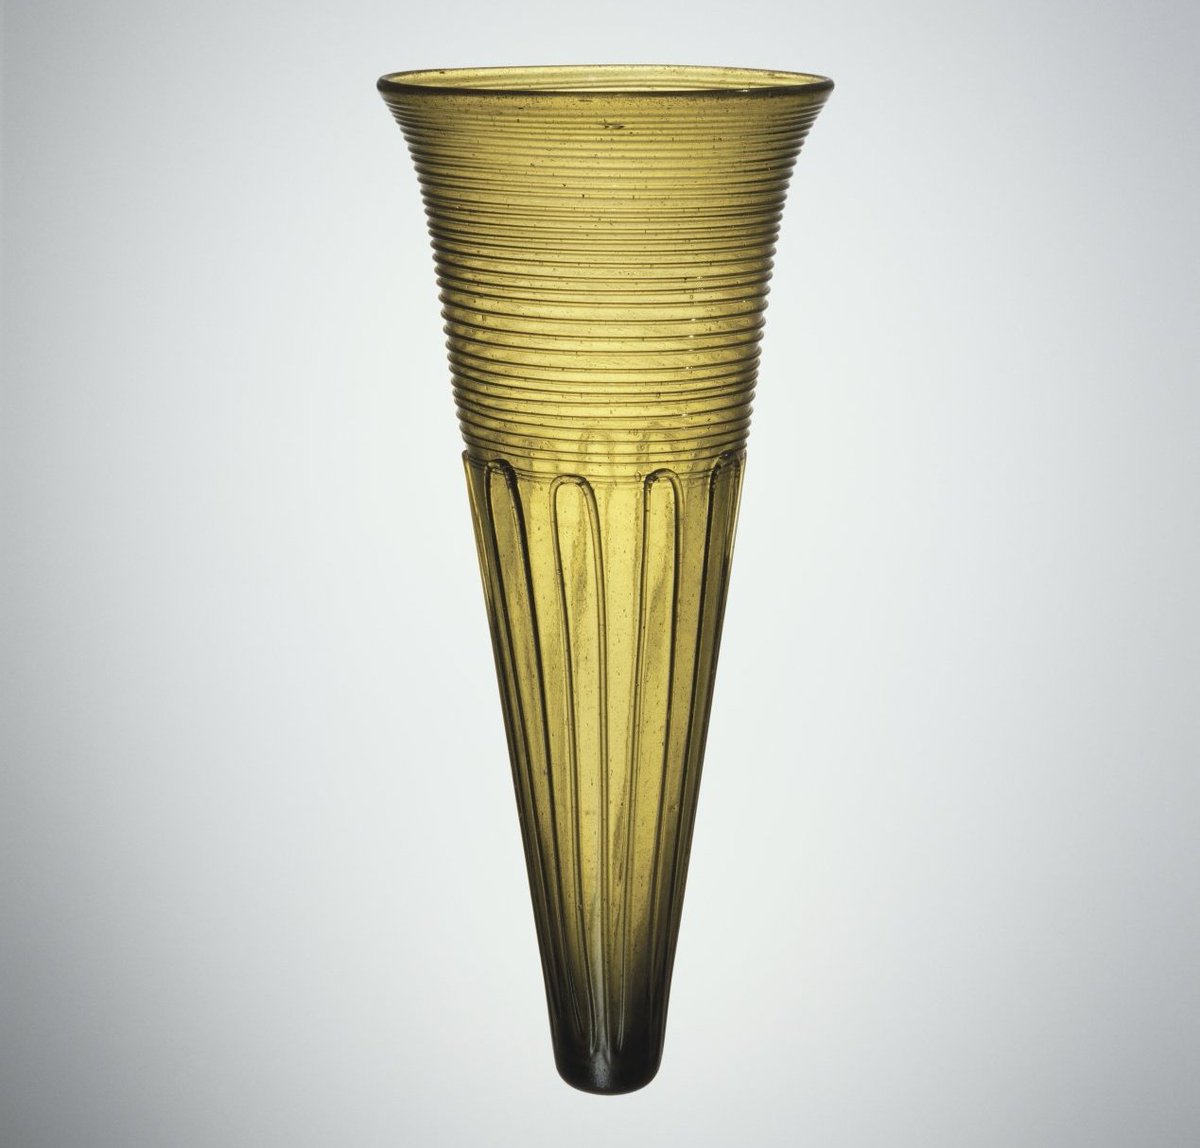 An early Anglo-Saxon cone beaker, 5th–6th century, found at Acklam, Yorkshire, England, in 1892:  https://www.cmog.org/artwork/cone-beaker-0